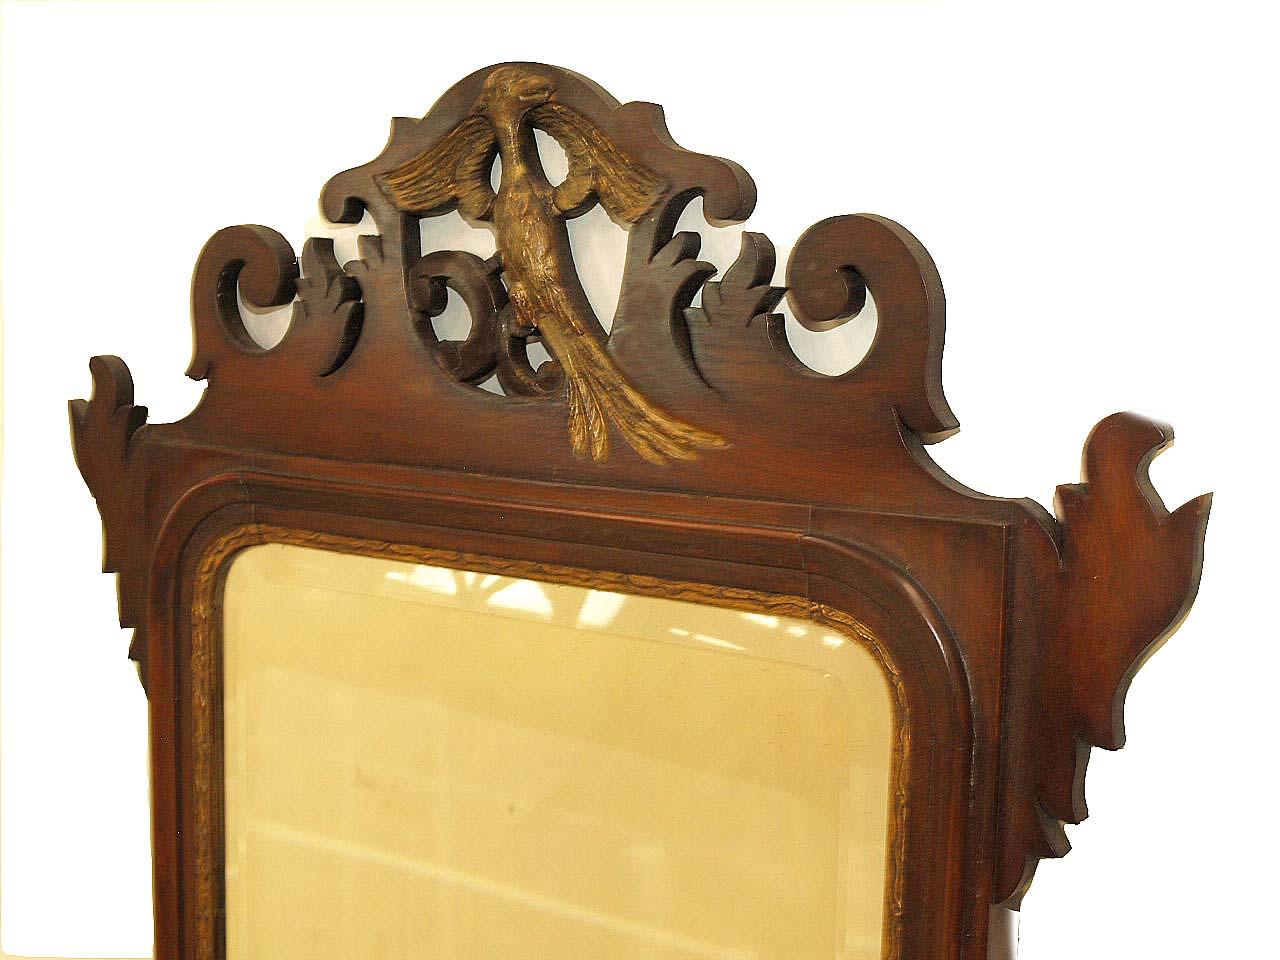 Georgian style inlaid mirror with the crest featuring gilded phoenix, the original beveled mirror surrounded by gilded molding, lower portion with inlaid conch shell.